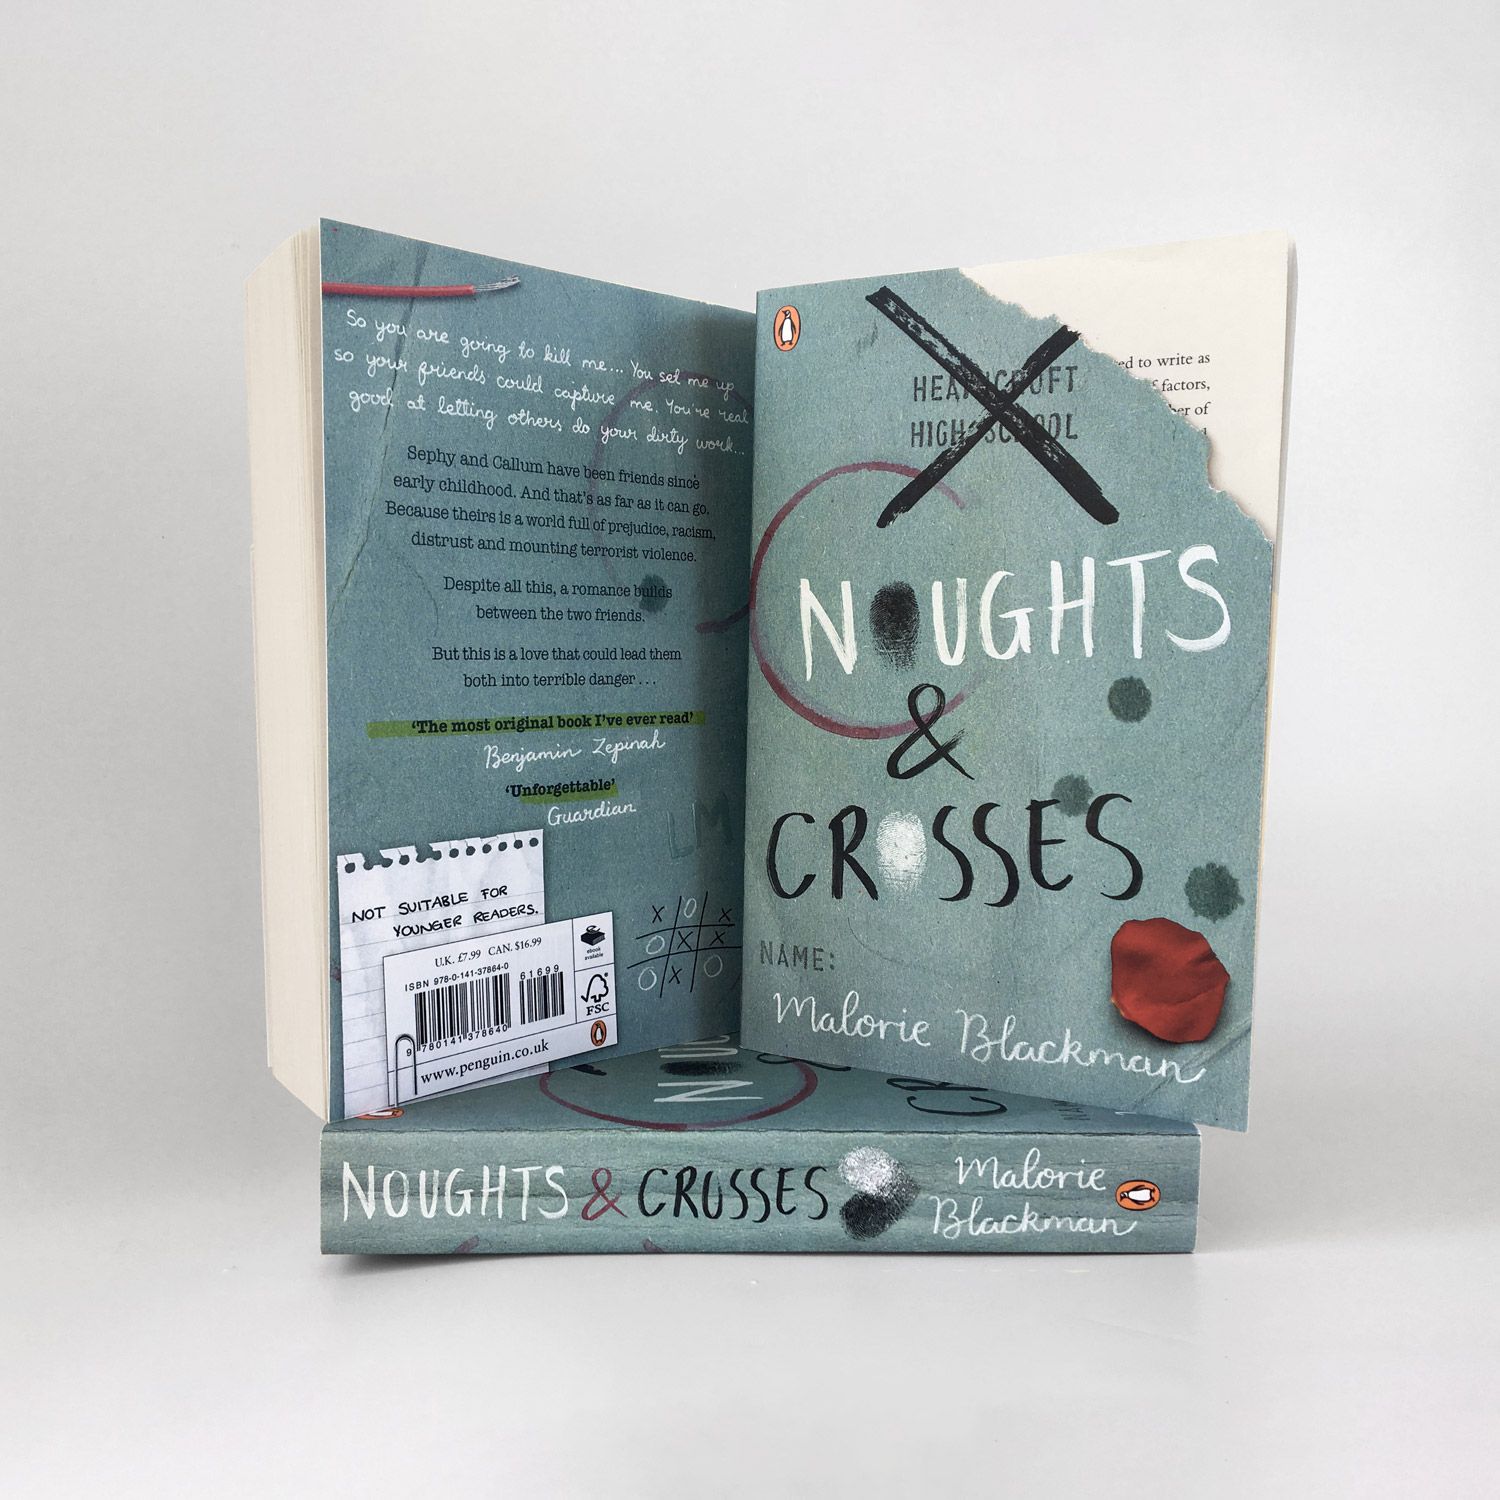 noughts and crosses personalised book cover for penguin design awards 2019, 3rd place helena dore illustrations and design